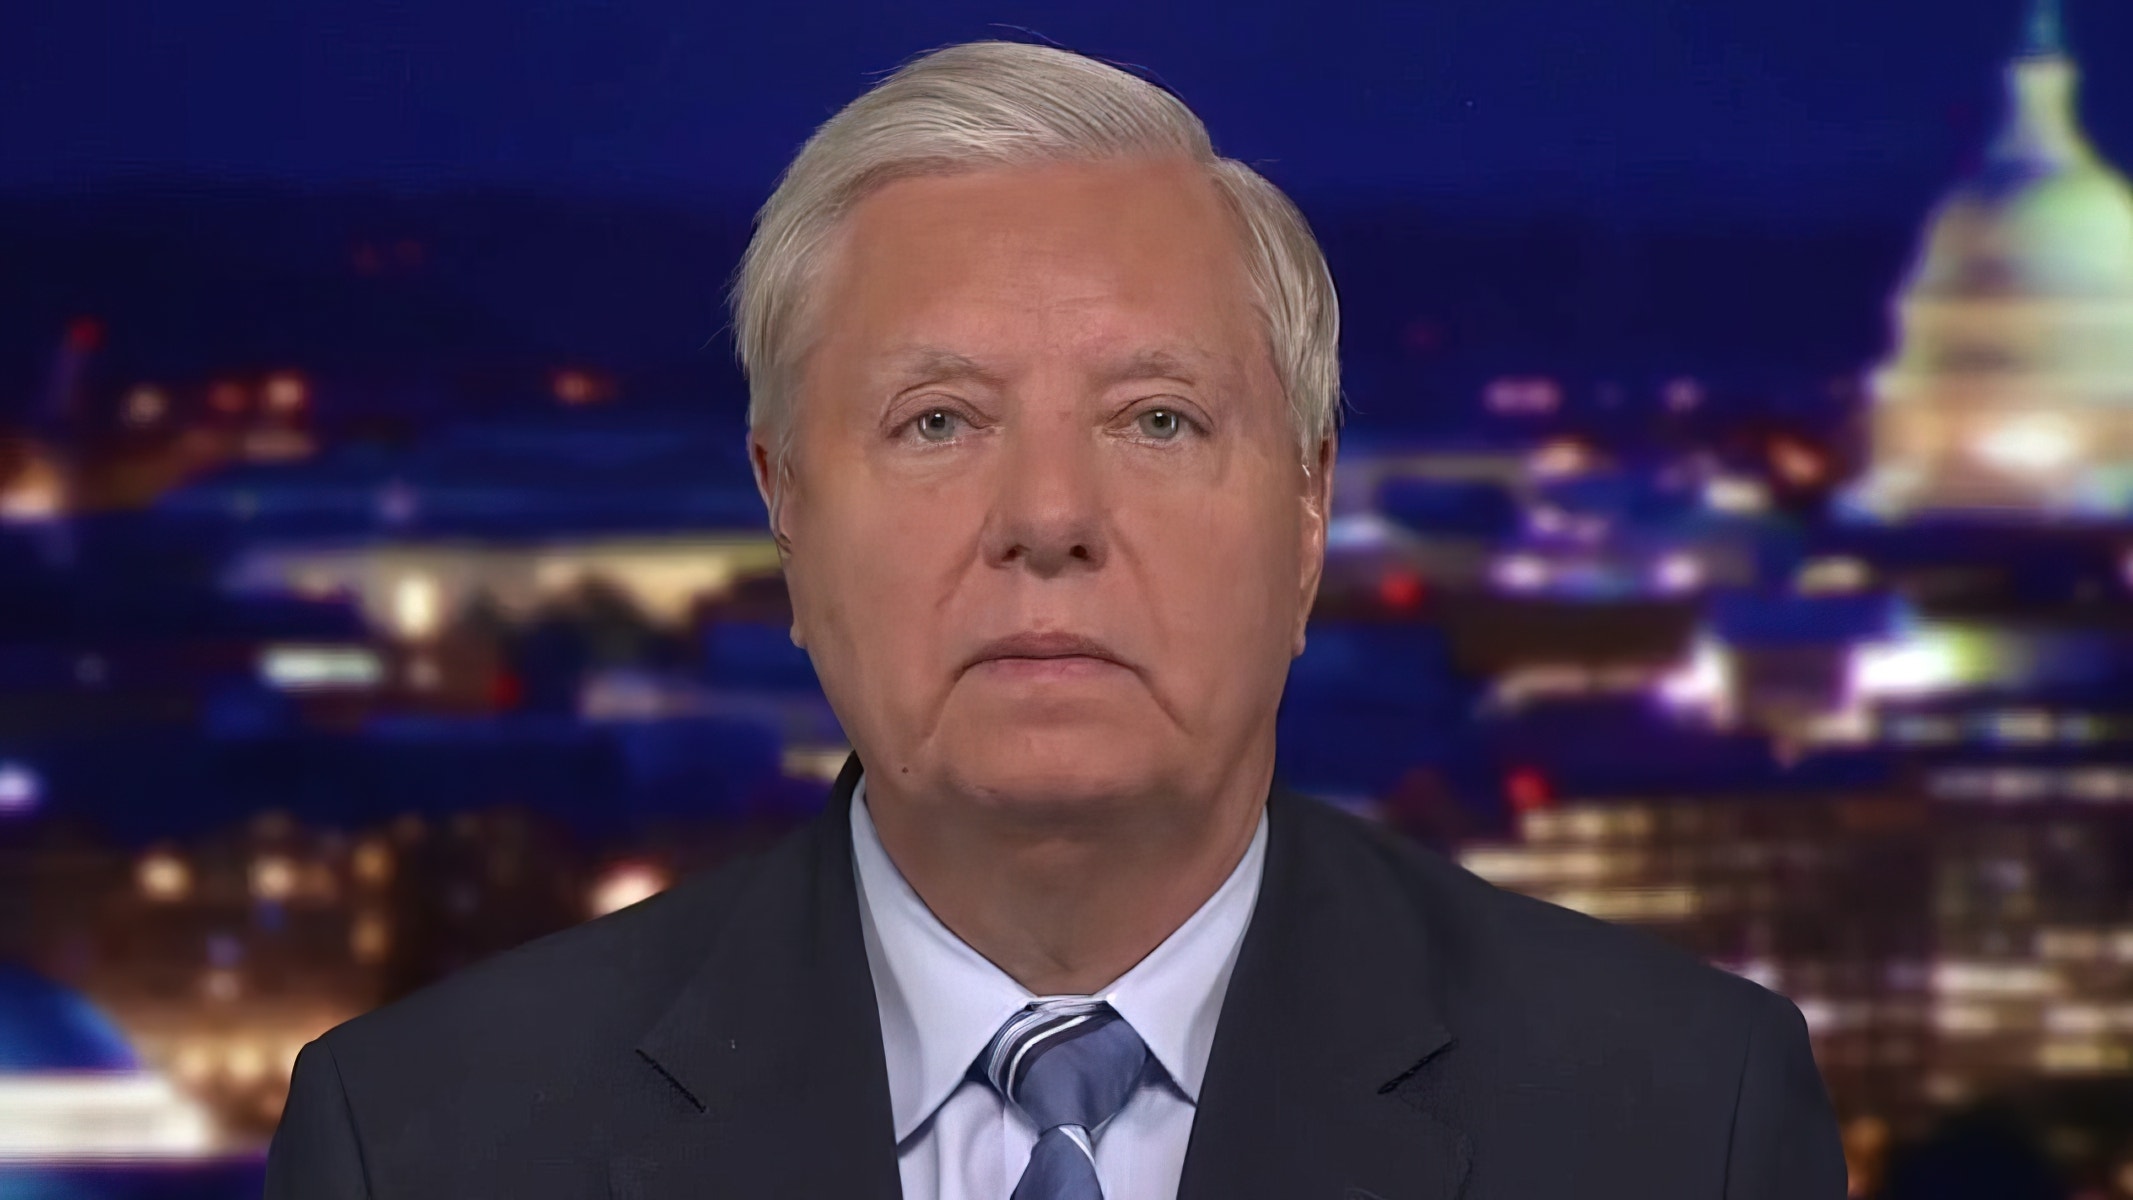 Sen. Graham says he won't support McConnell as Senate leader unless he has 'working relationship' with Trump